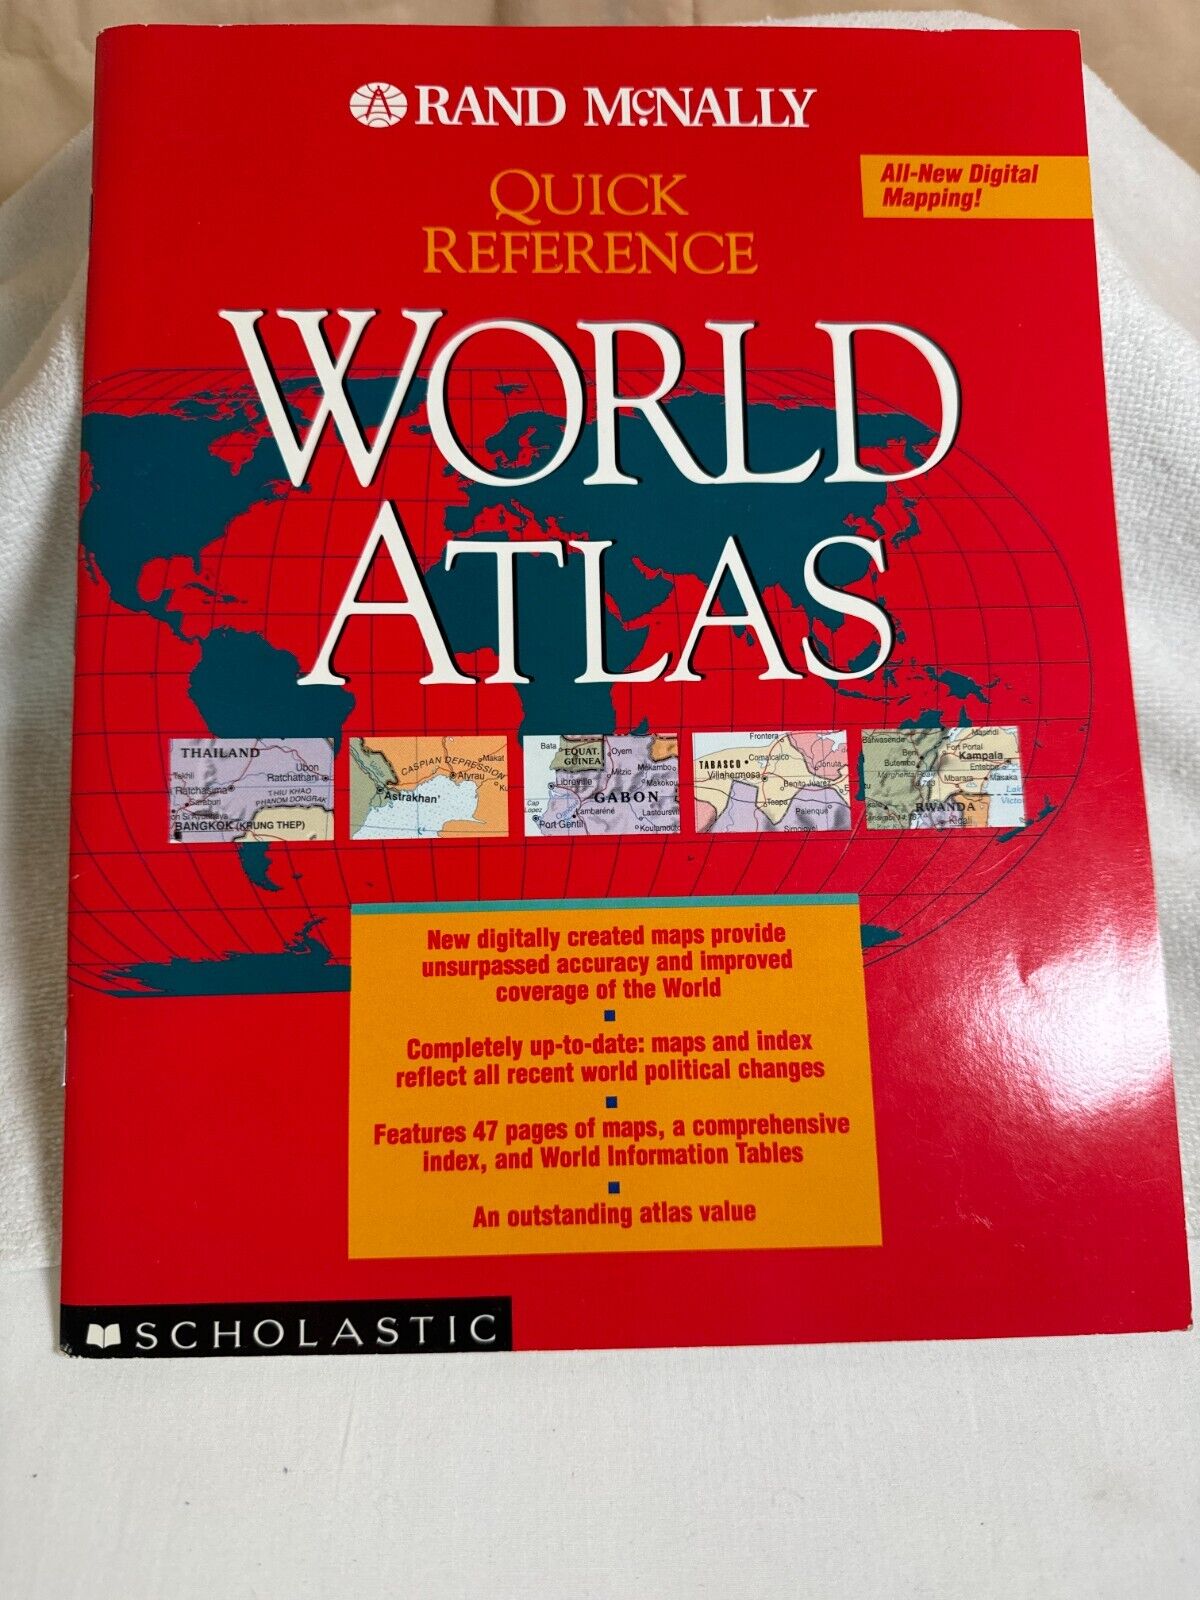 RAND MCNALLY ILLUSTRATED WORLD ATLAS Quick Reference Guide Paperback 1996